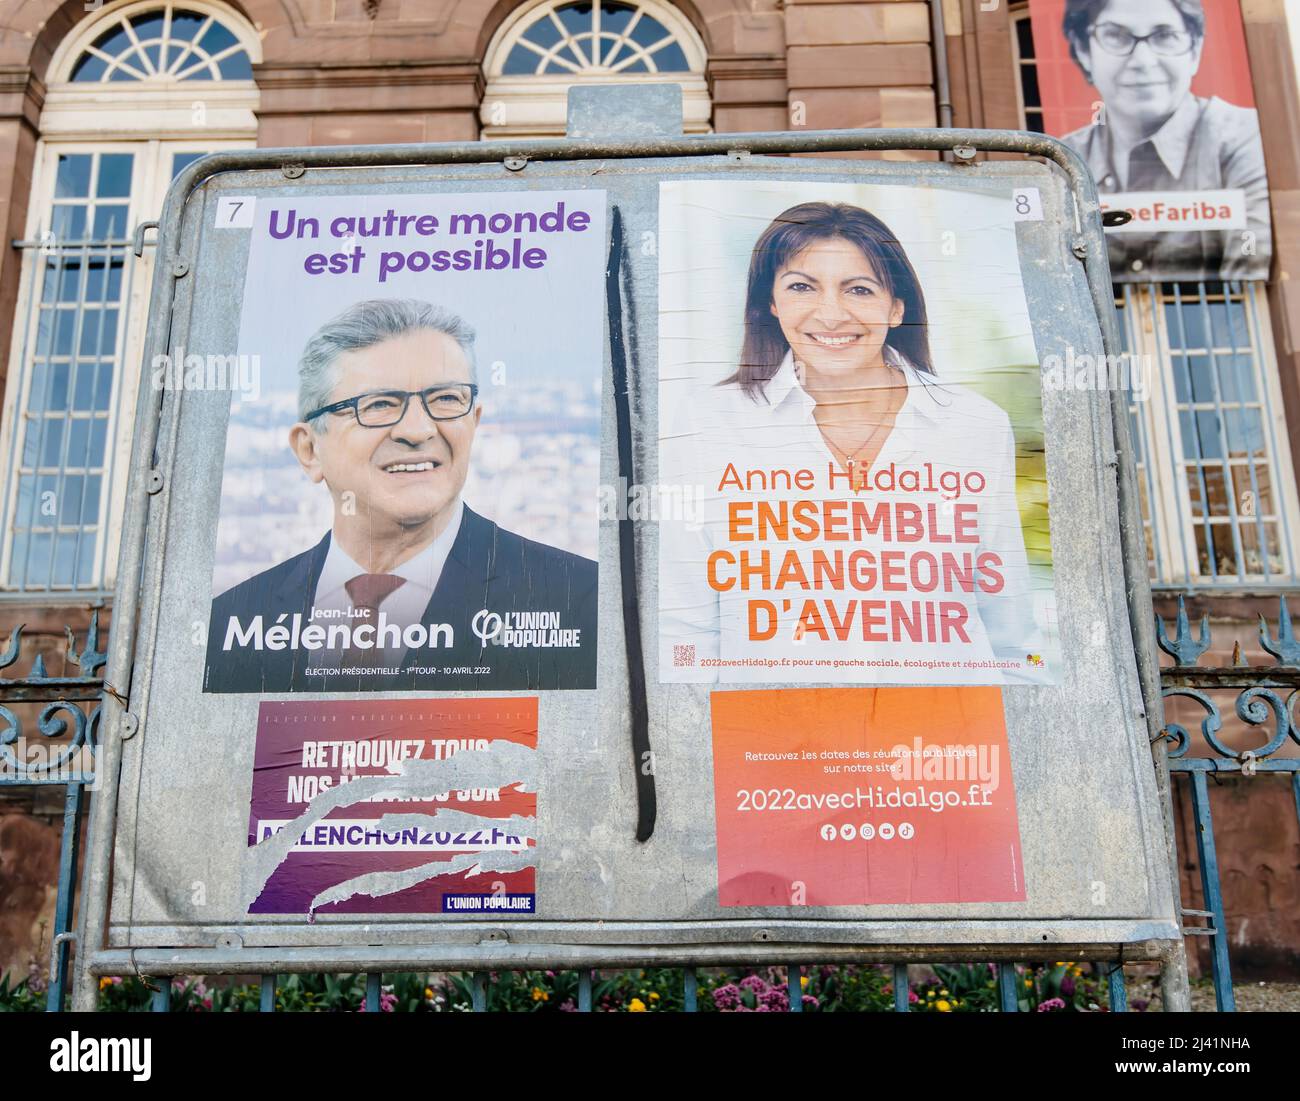 STRASBOURG, FRANCE - APR 23, 2022: French presidential posters for the upcoming presidential election in France, in front of the City Hall building in Strasbourg featuring Anne Hidalgo and Jean-Luc Melenchon Stock Photo